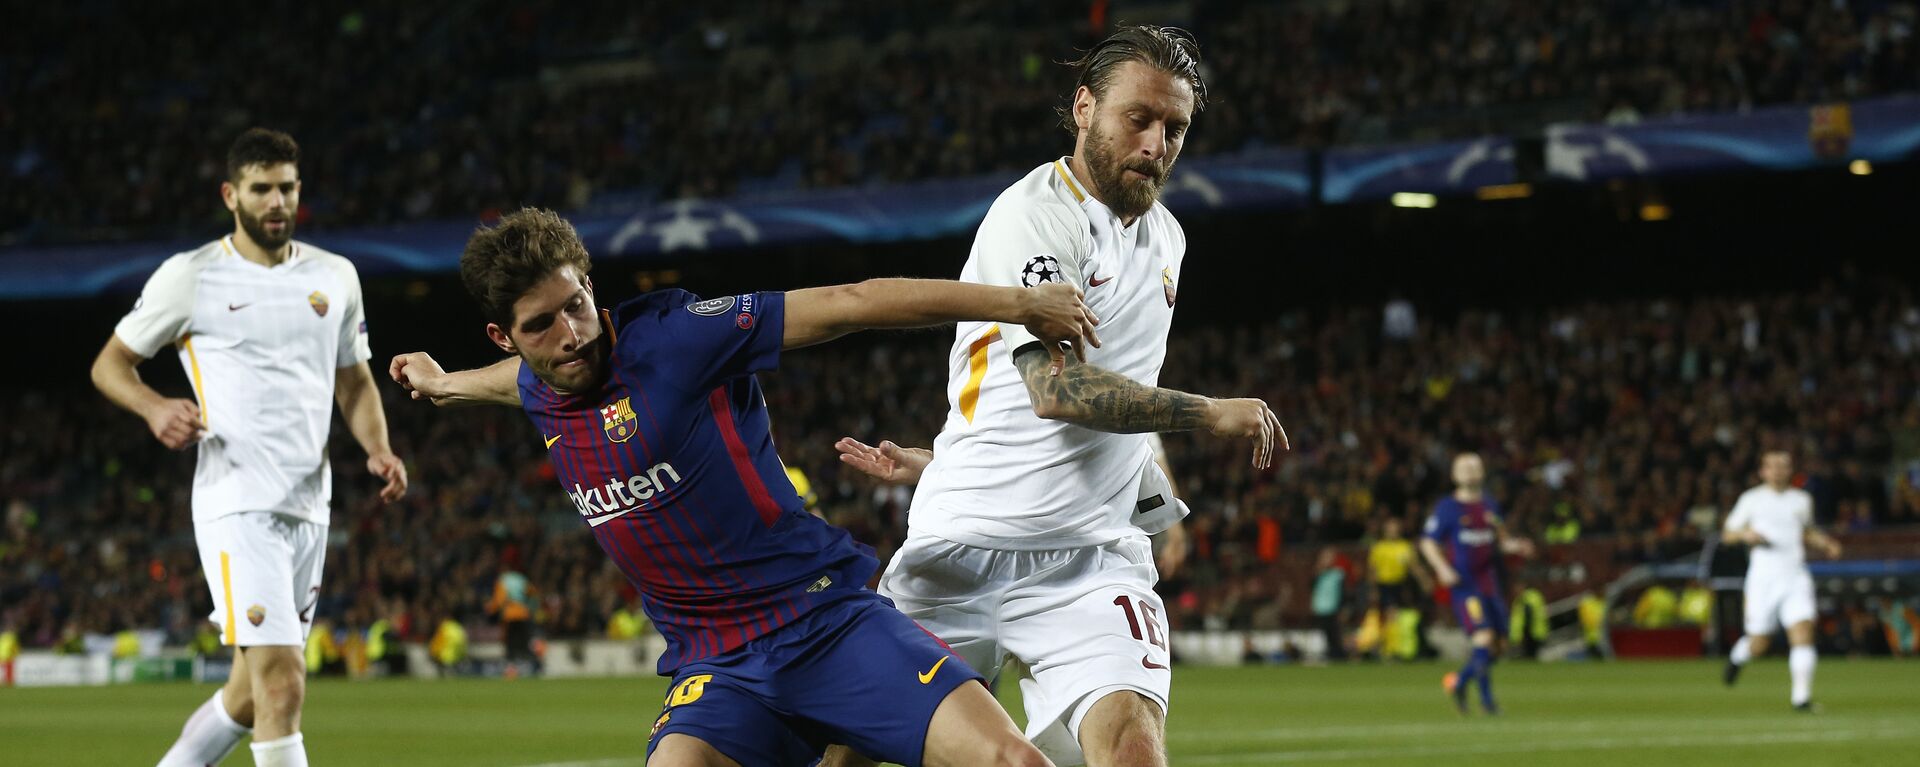 Barcelona's Sergi Roberto, left, challenges for the ball with Roma's Daniele de Rossi during a Champions League quarter-final, first leg soccer match between FC Barcelona and Roma at the Camp Nou stadium in Barcelona, Spain, Wednesday, April 4, 2018 - اسپوتنیک افغانستان  , 1920, 24.08.2021